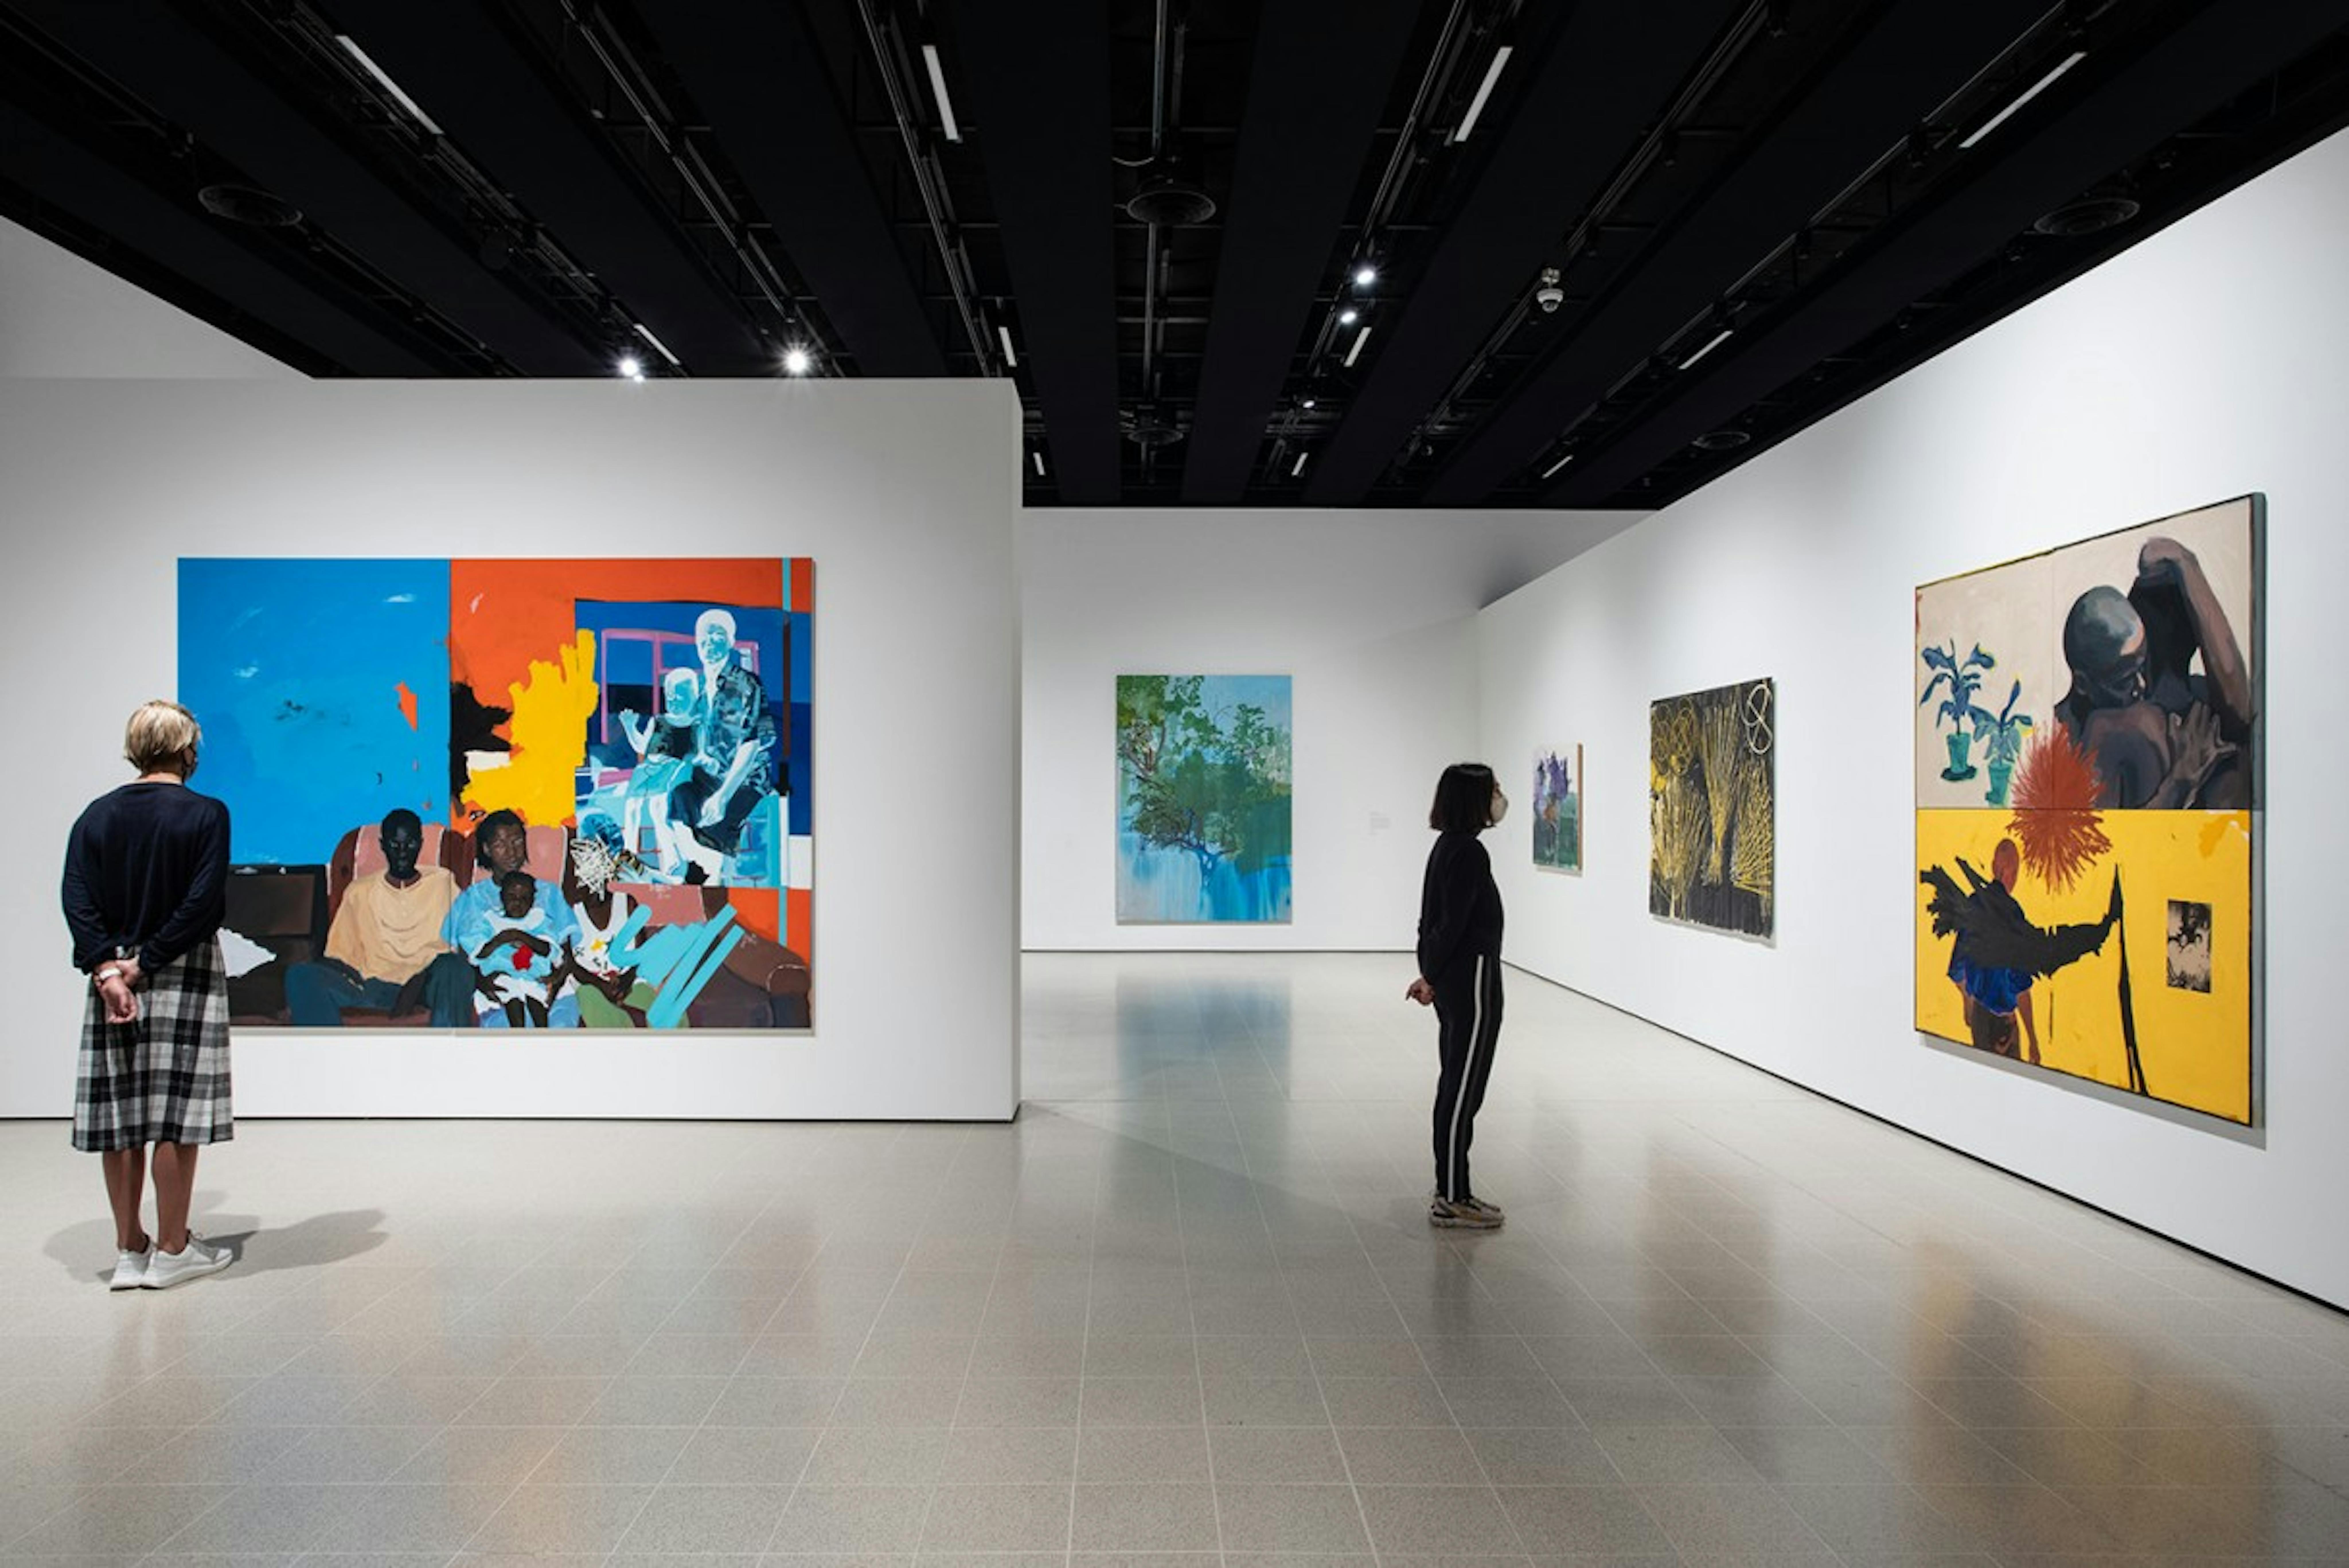 An installation of a gallery with large figurative and colourful paintings throughout. Two figures stand and look at the paintings providing a sense of scale. 